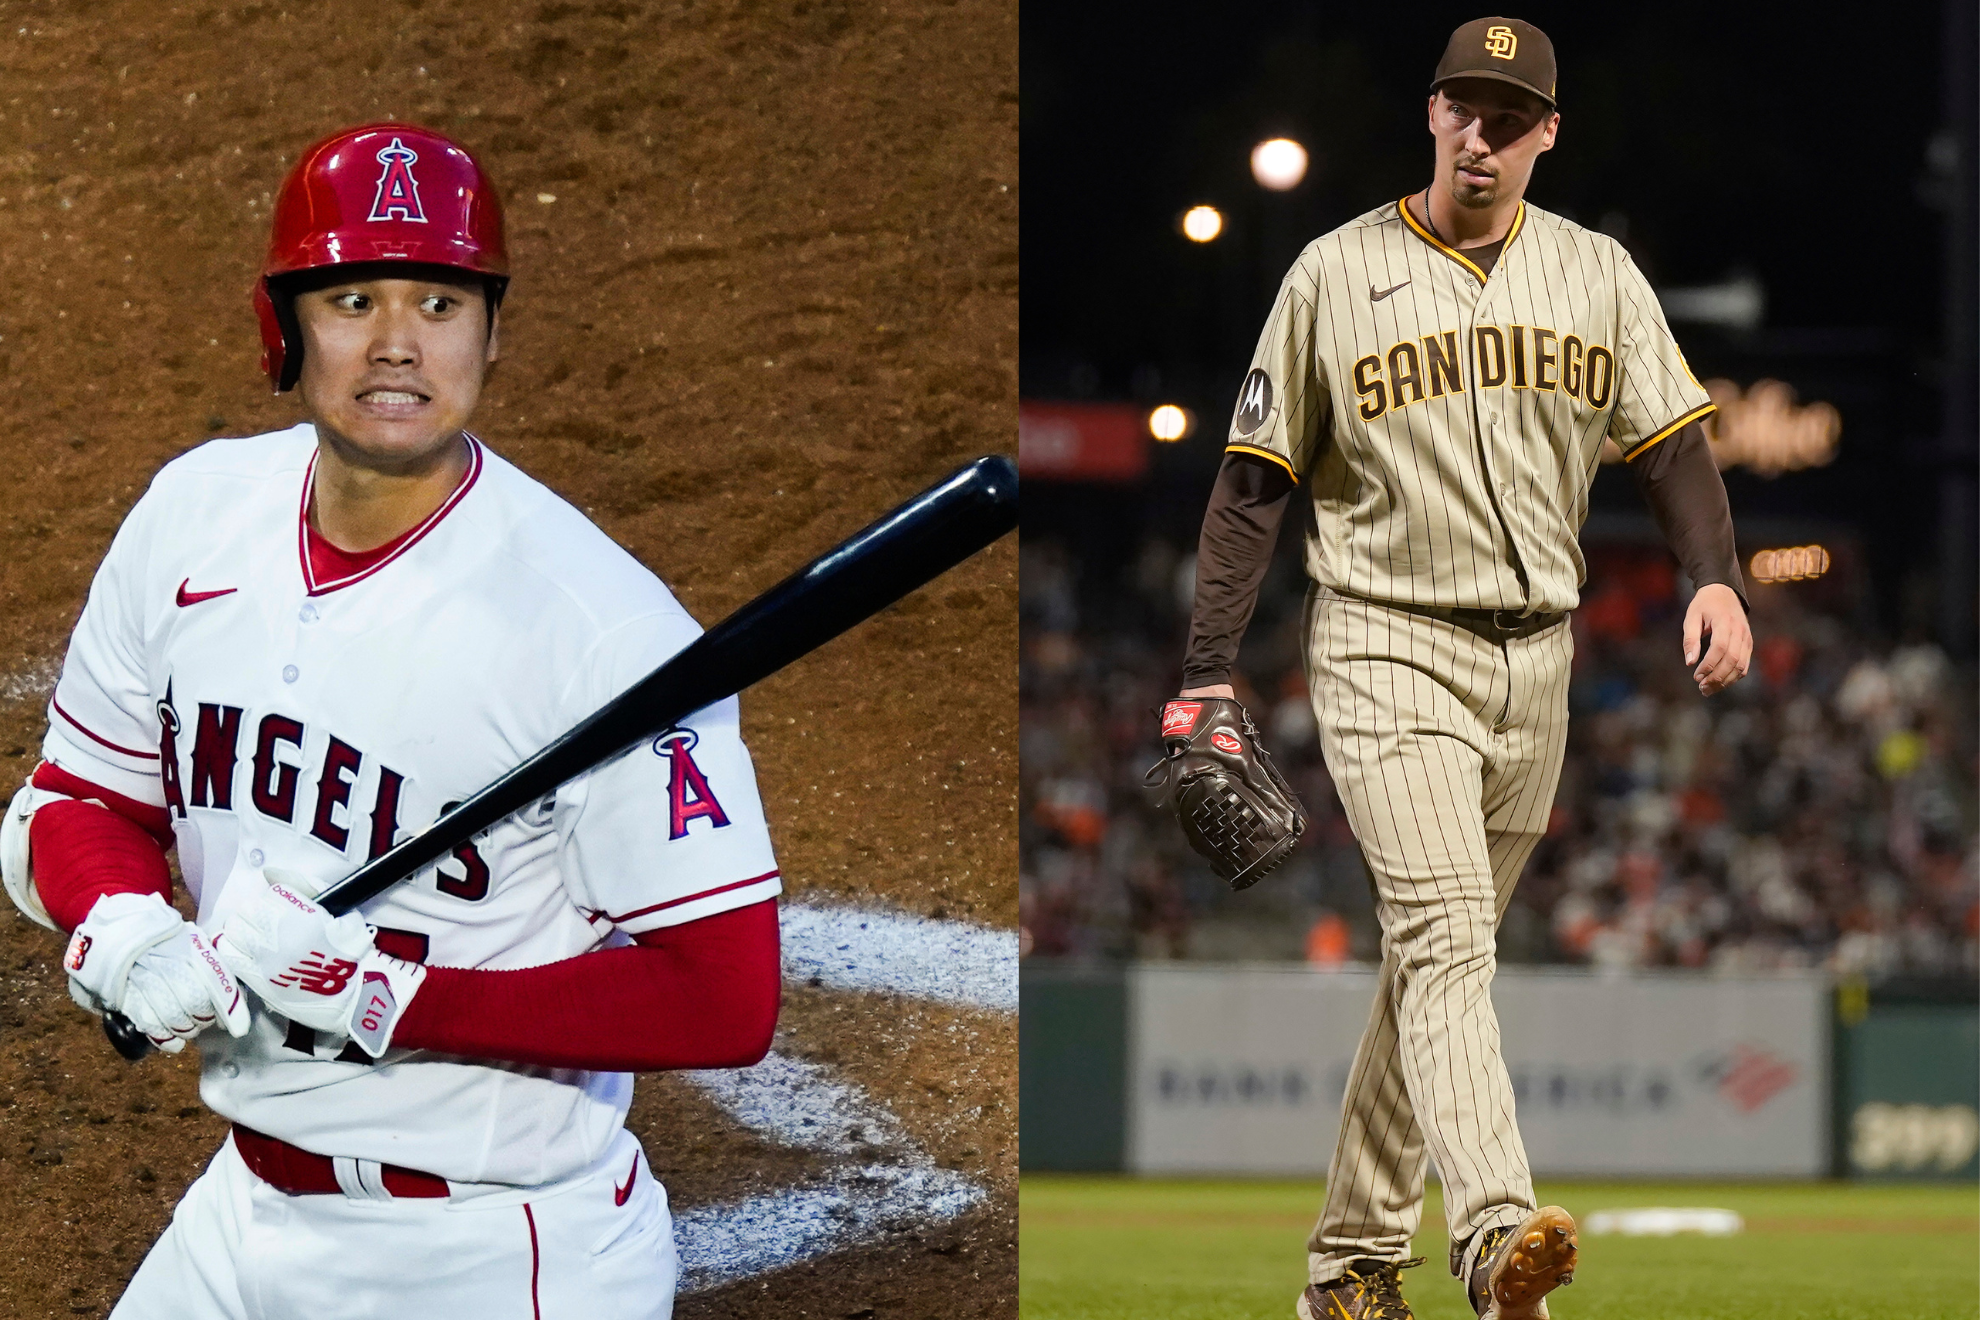 Ohtani (left) is the likely AL MVP, while Snell (right) is expected to win the NL Cy Young Award.